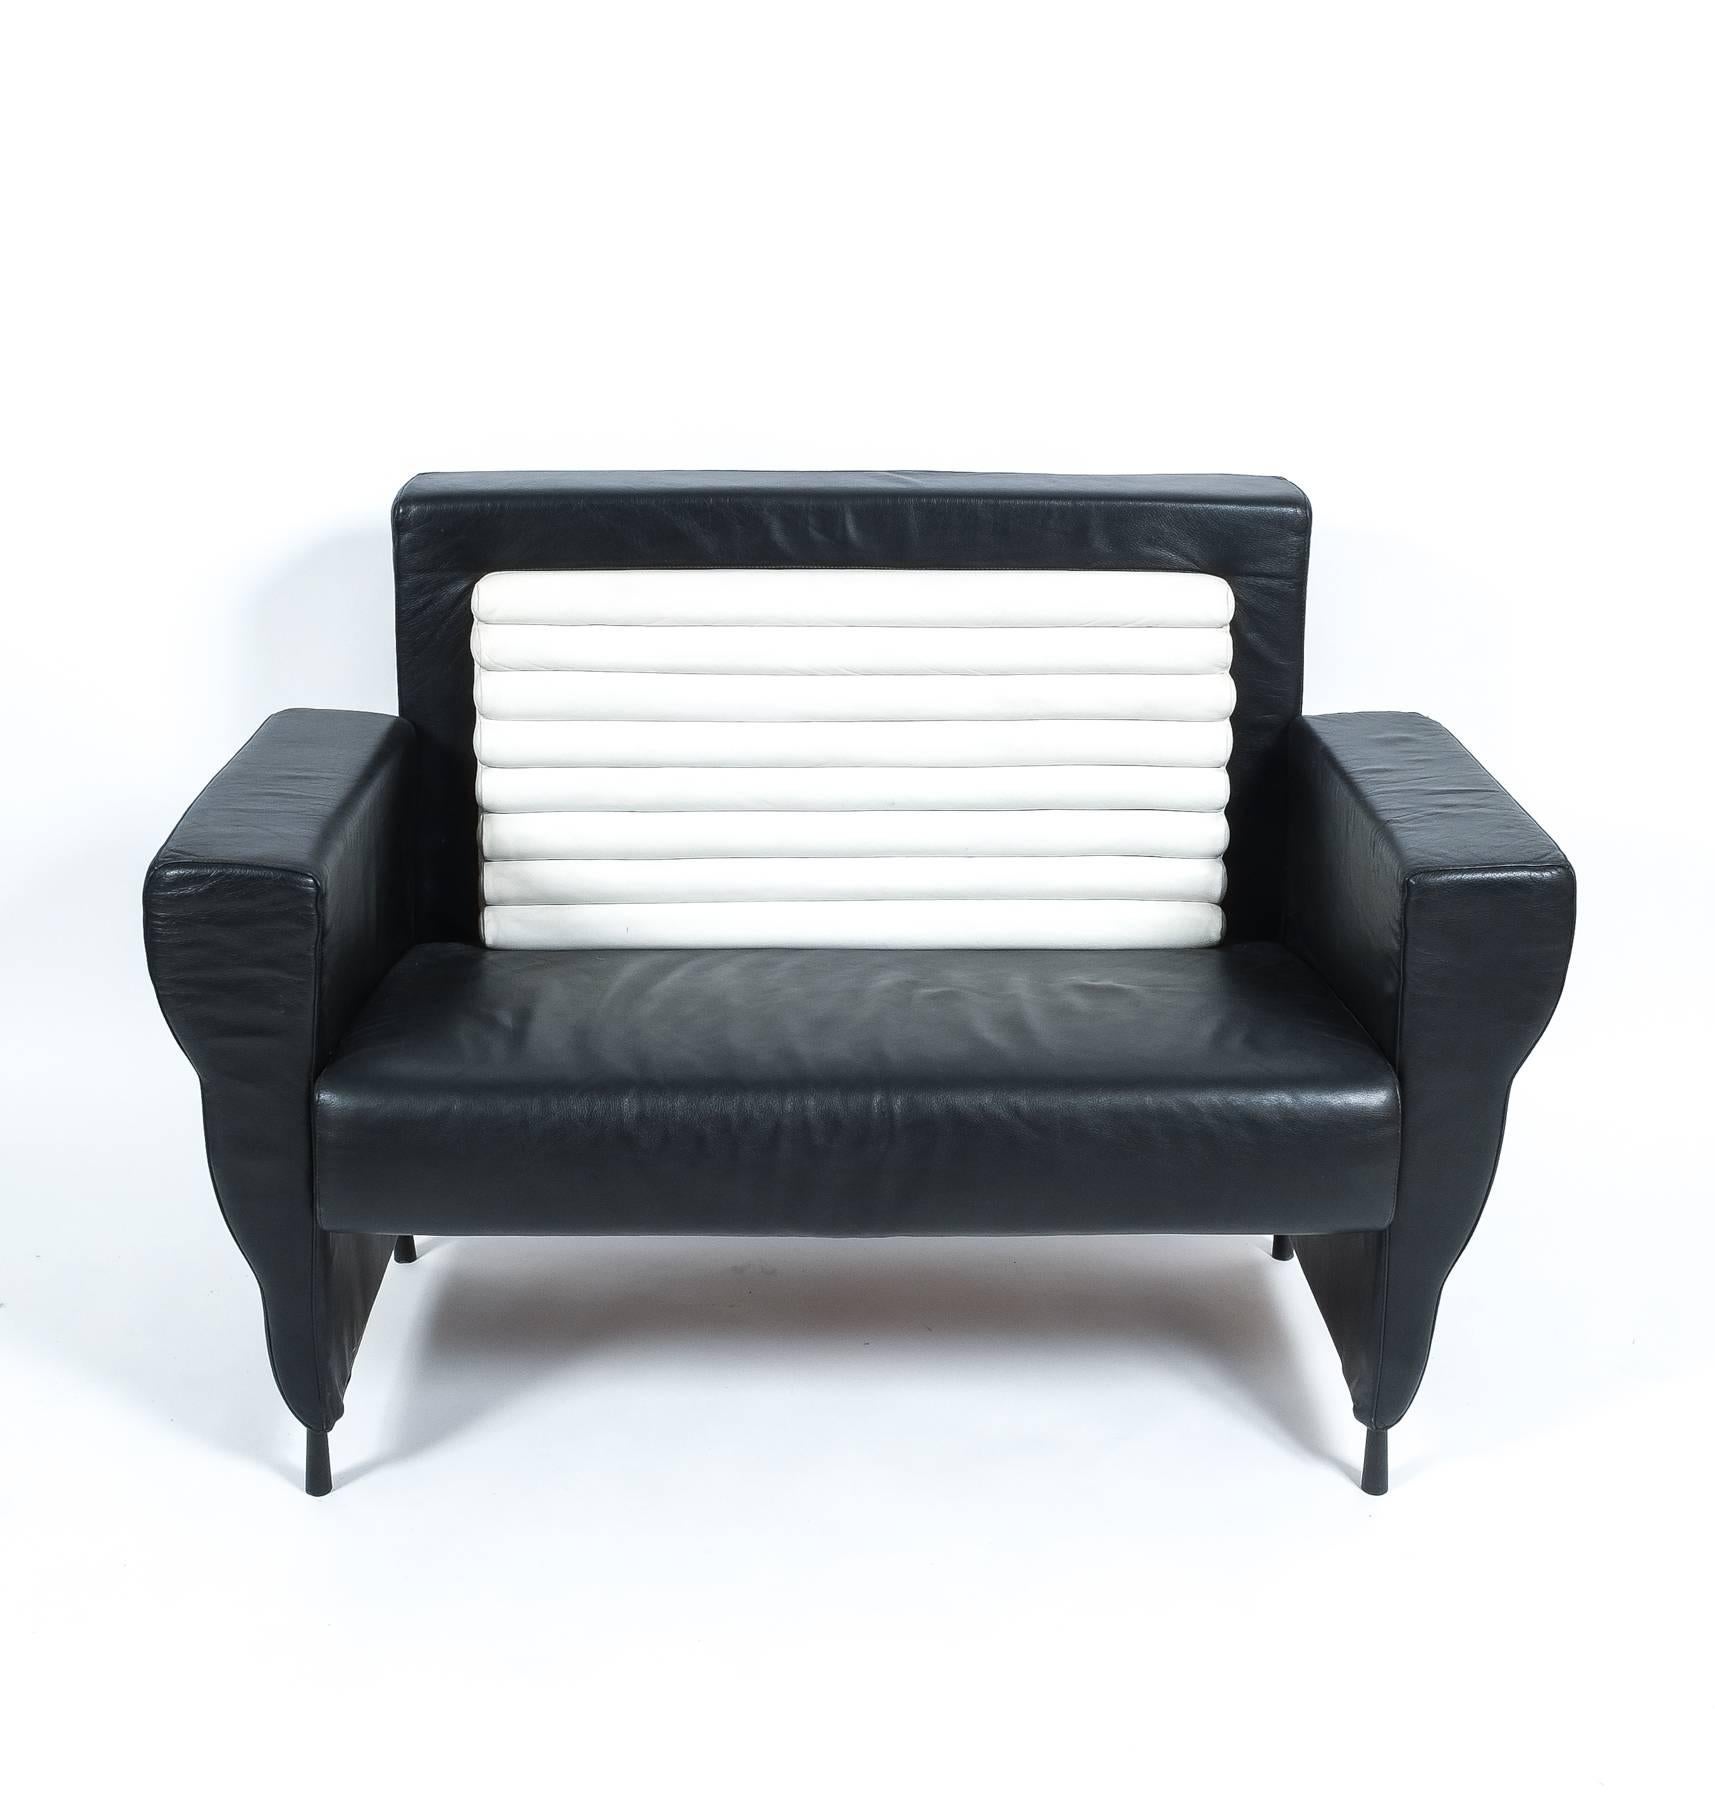 Post-Modern Ugo La Pietra for Busnelli Flessuosa Black and White Leather Sofa, Italy 1985 For Sale